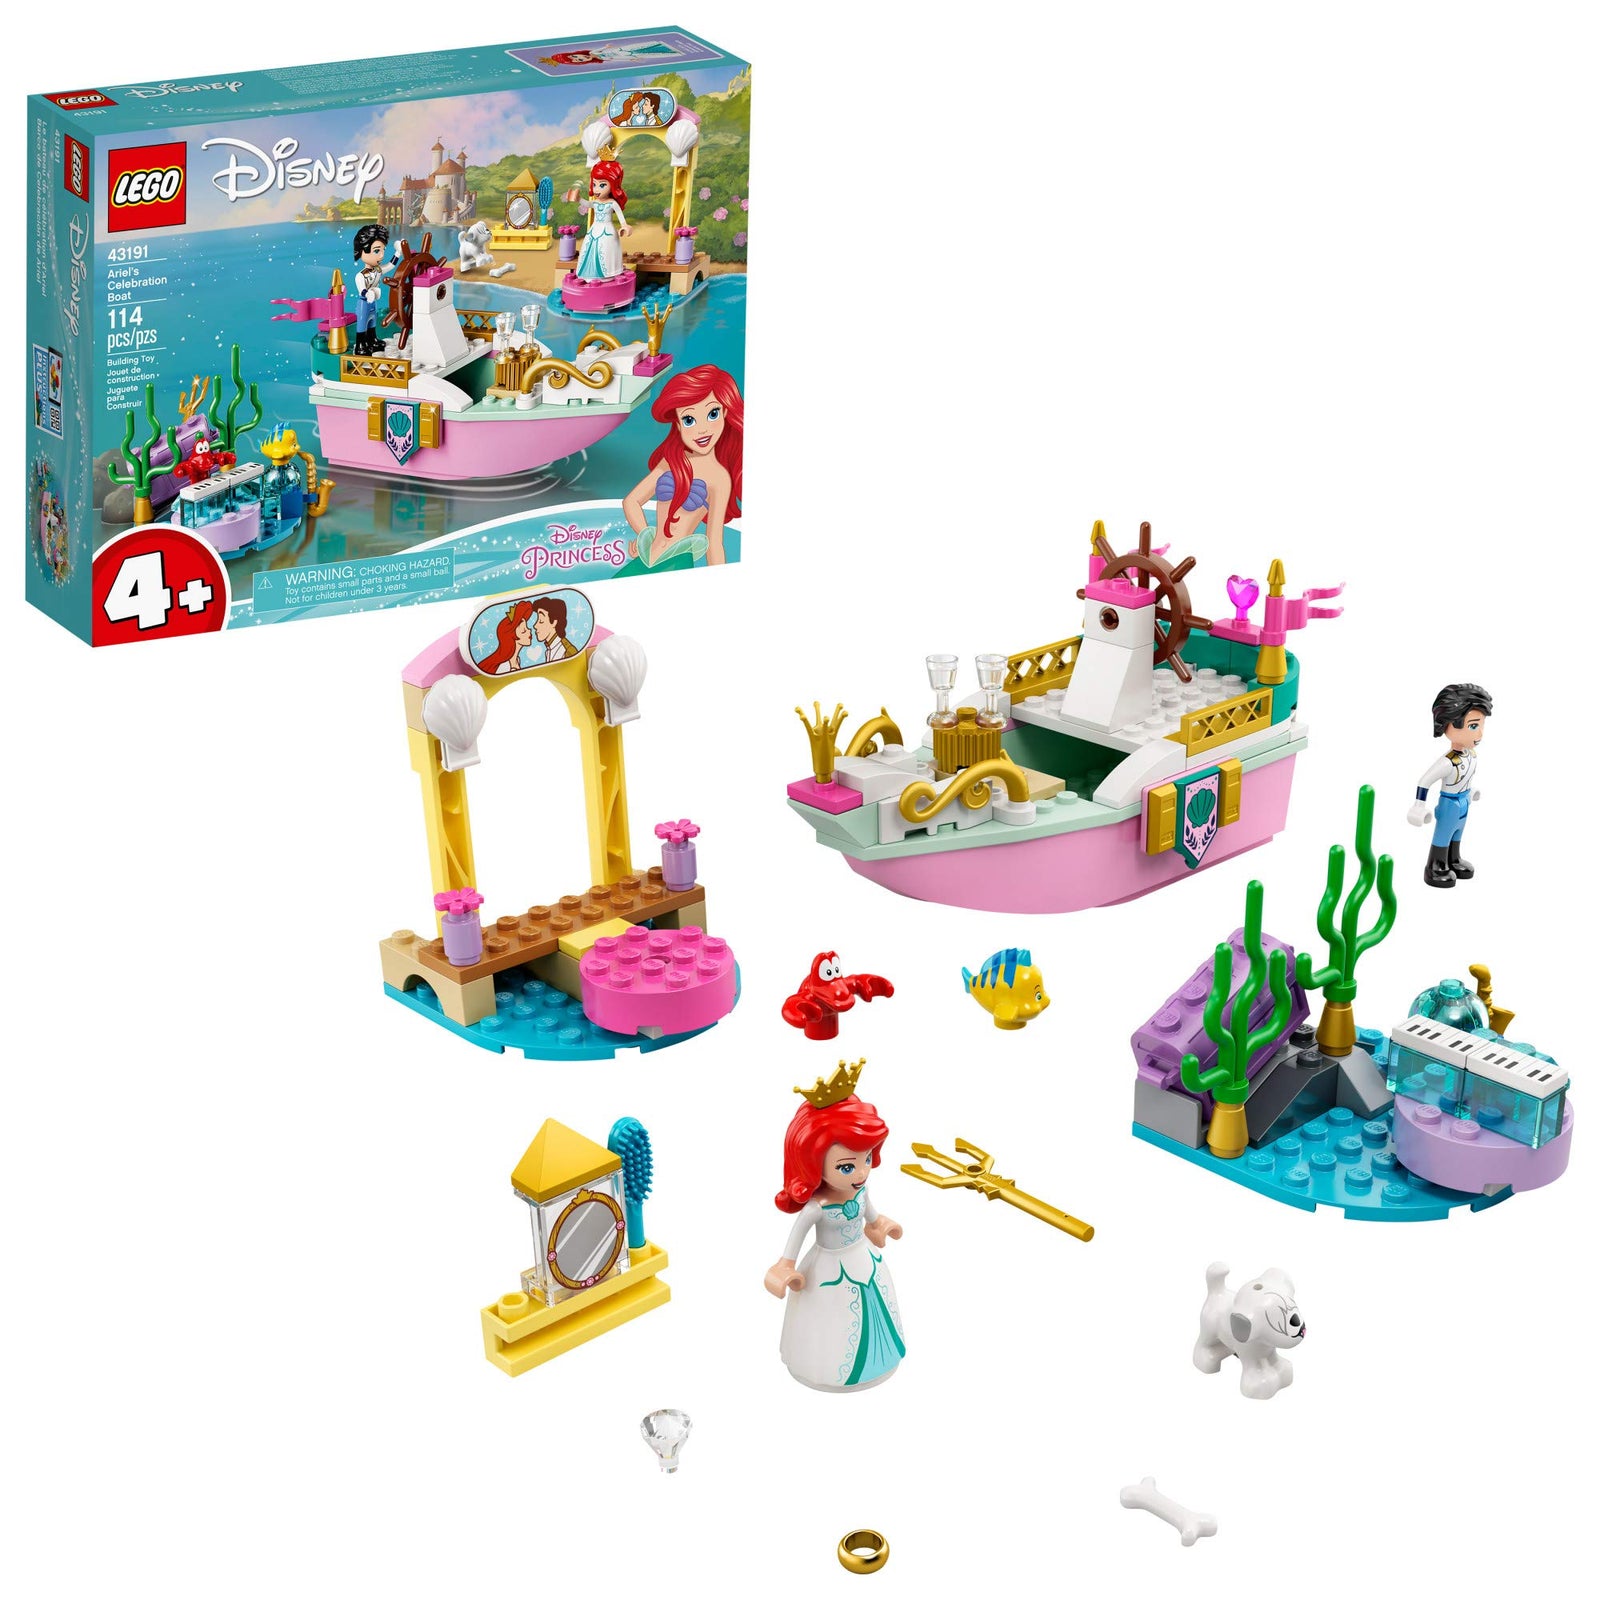 LEGO Disney Ariel’s Celebration Boat 43191; Creative Building Kit That Makes a Fun Gift for Kids, New 2021 (114 Pieces)